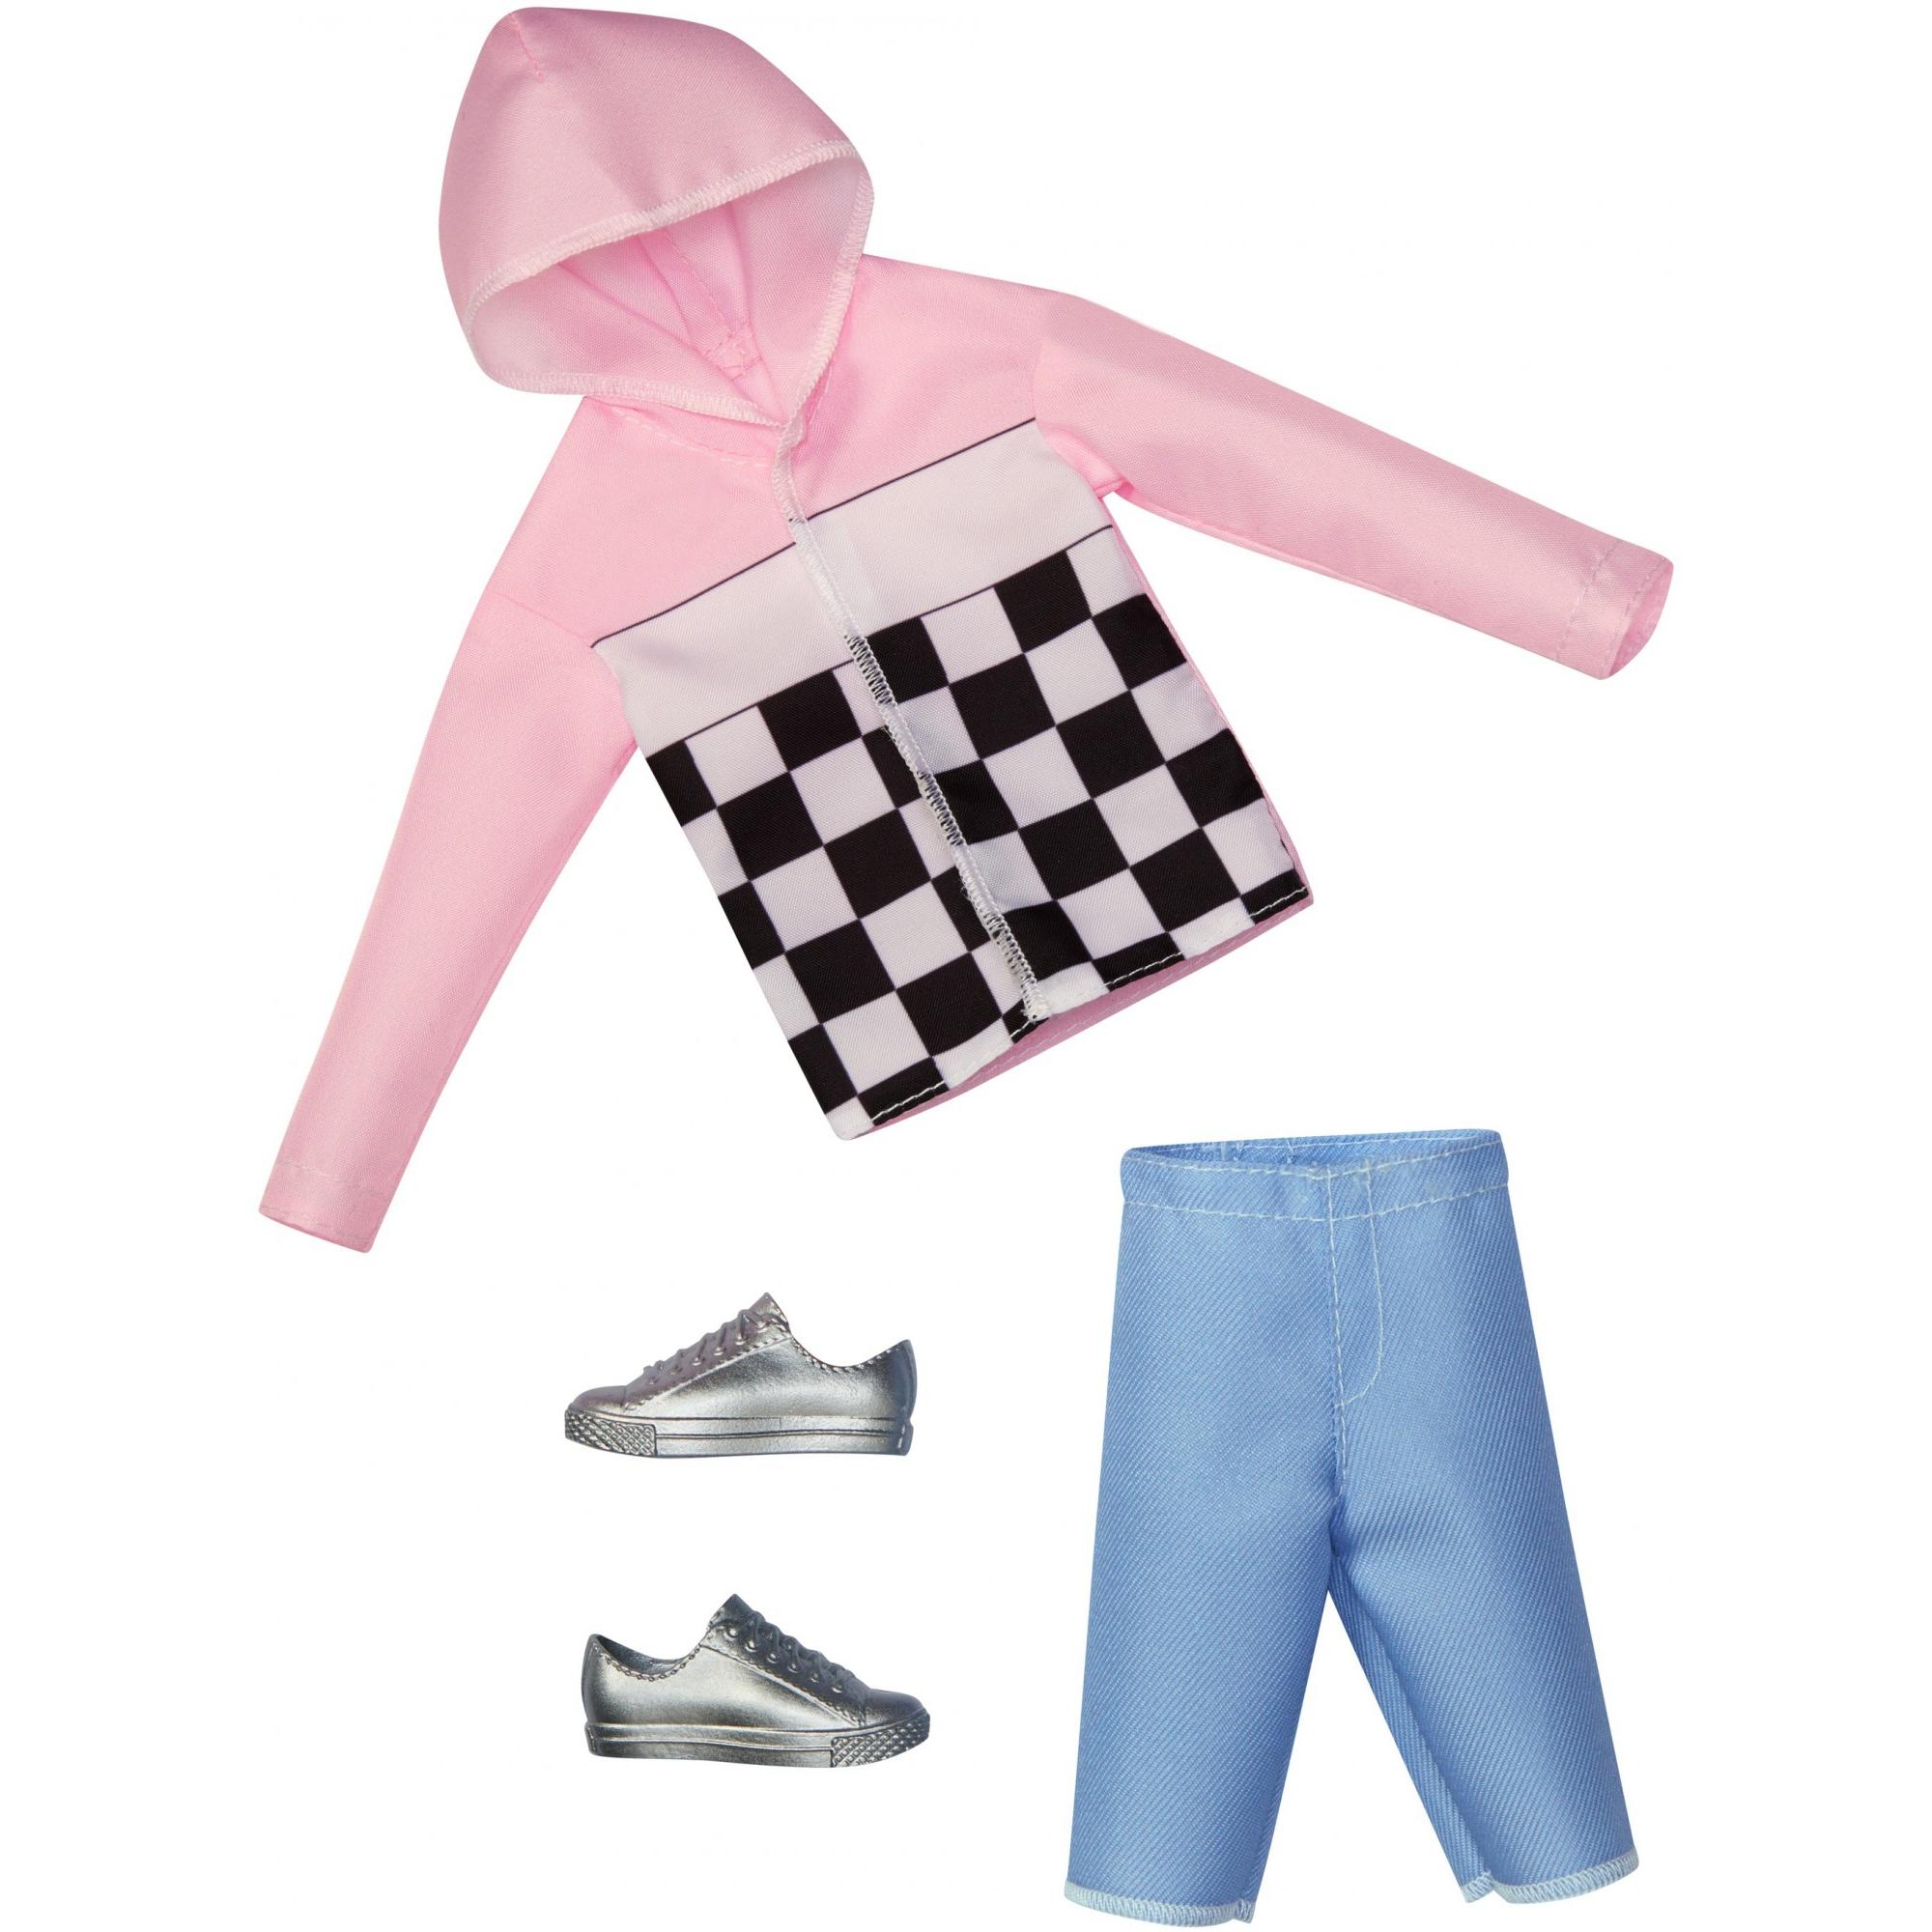 Barbie Ken Fashion, Original Body Type, Checkered Top Outfit - image 1 of 2